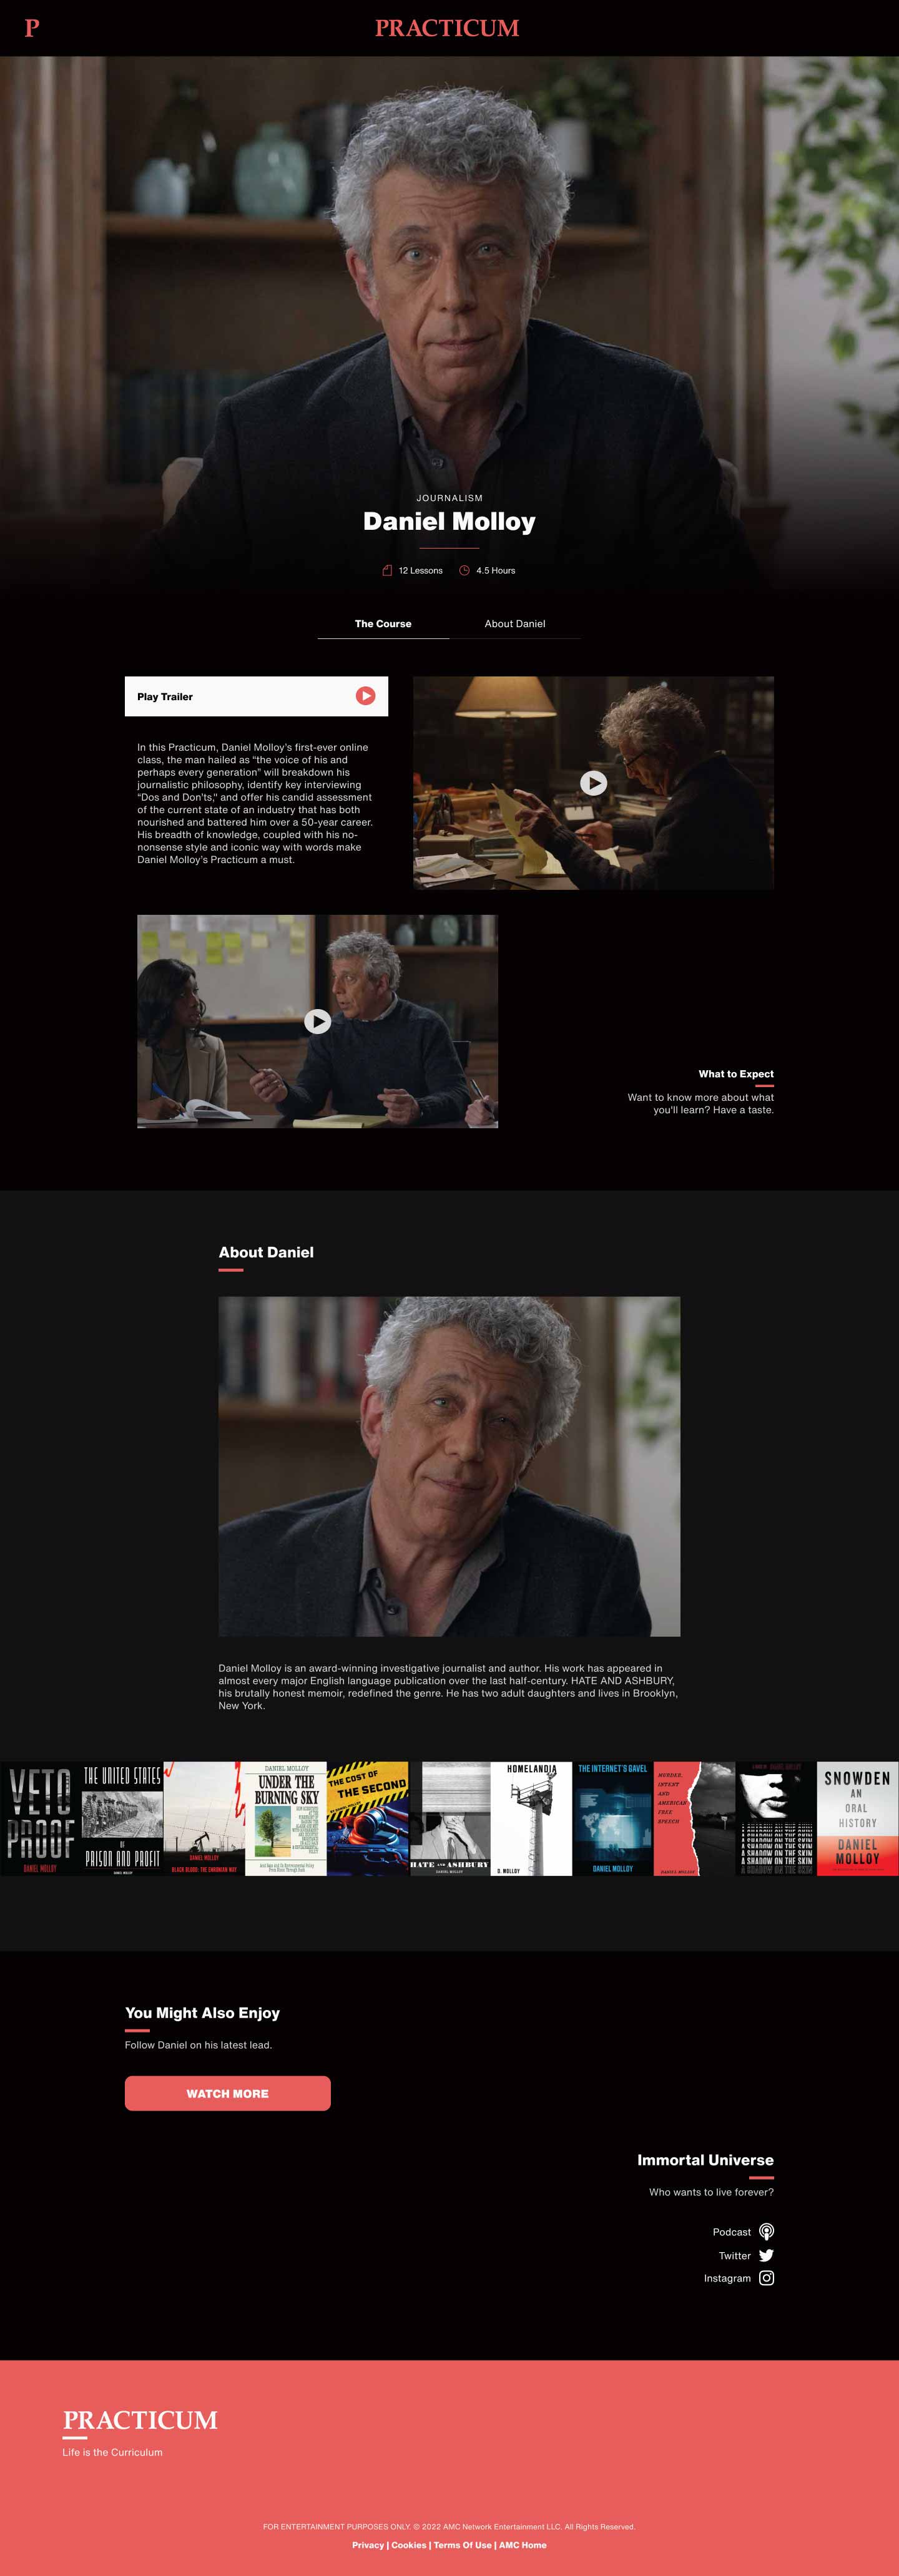 A complete page-length image of the desktop design for an in-world website for AMC's series Interview with a Vampire. It is a journalism course on a site called Practicum conducted by the character of Daniel Molloy, portrayed by Eric Bogosian. It features a hero image of Daniel, an outline of the course, a trailer, biographical details, and the fictional covers of the books the character has written.